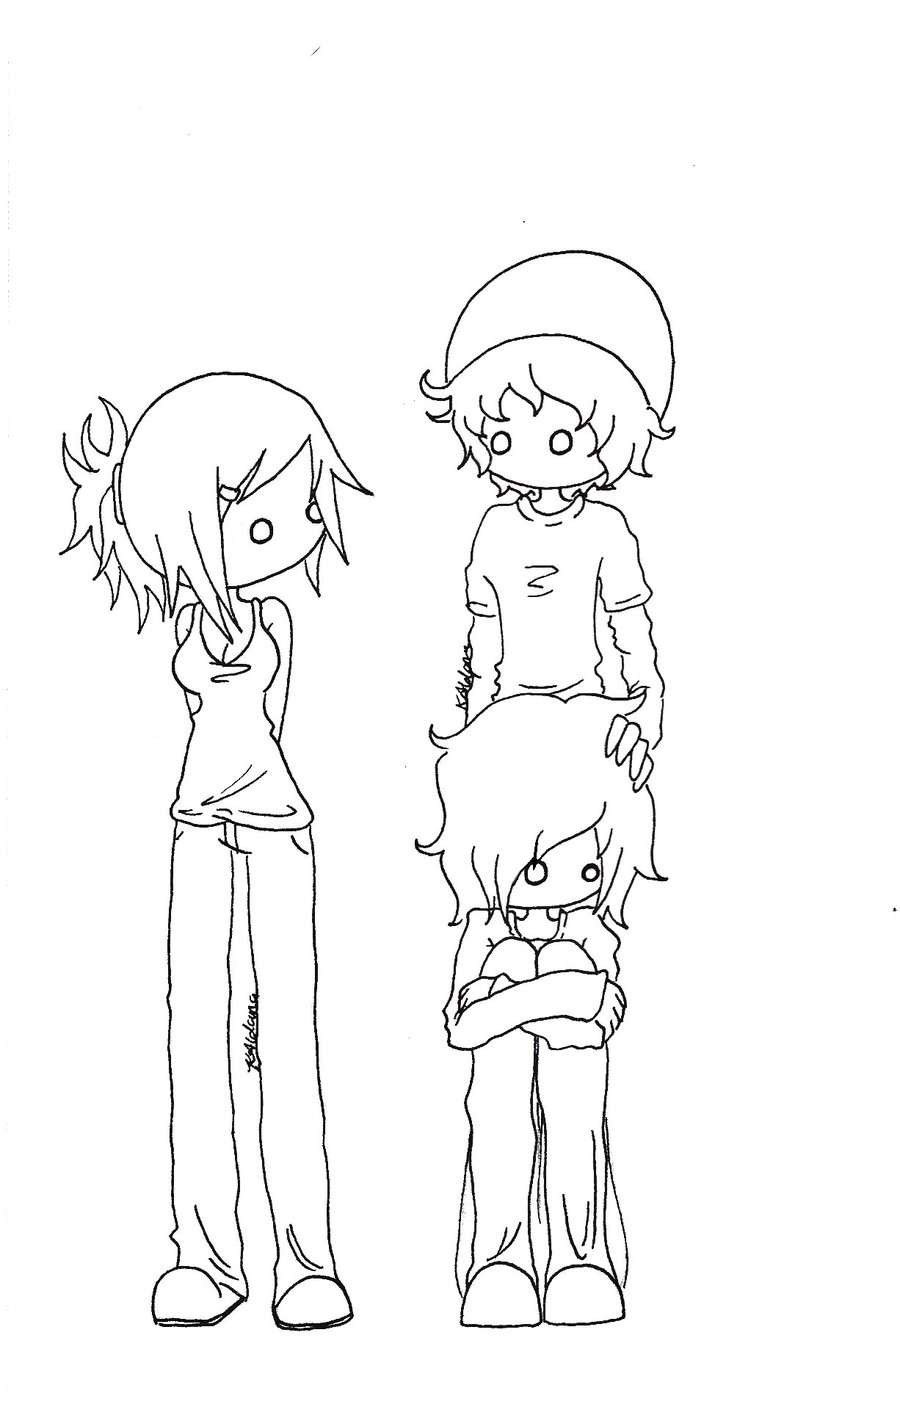 Coloring Pages For Teens Emo Anime
 Emo Coloring Pages coloringsuite